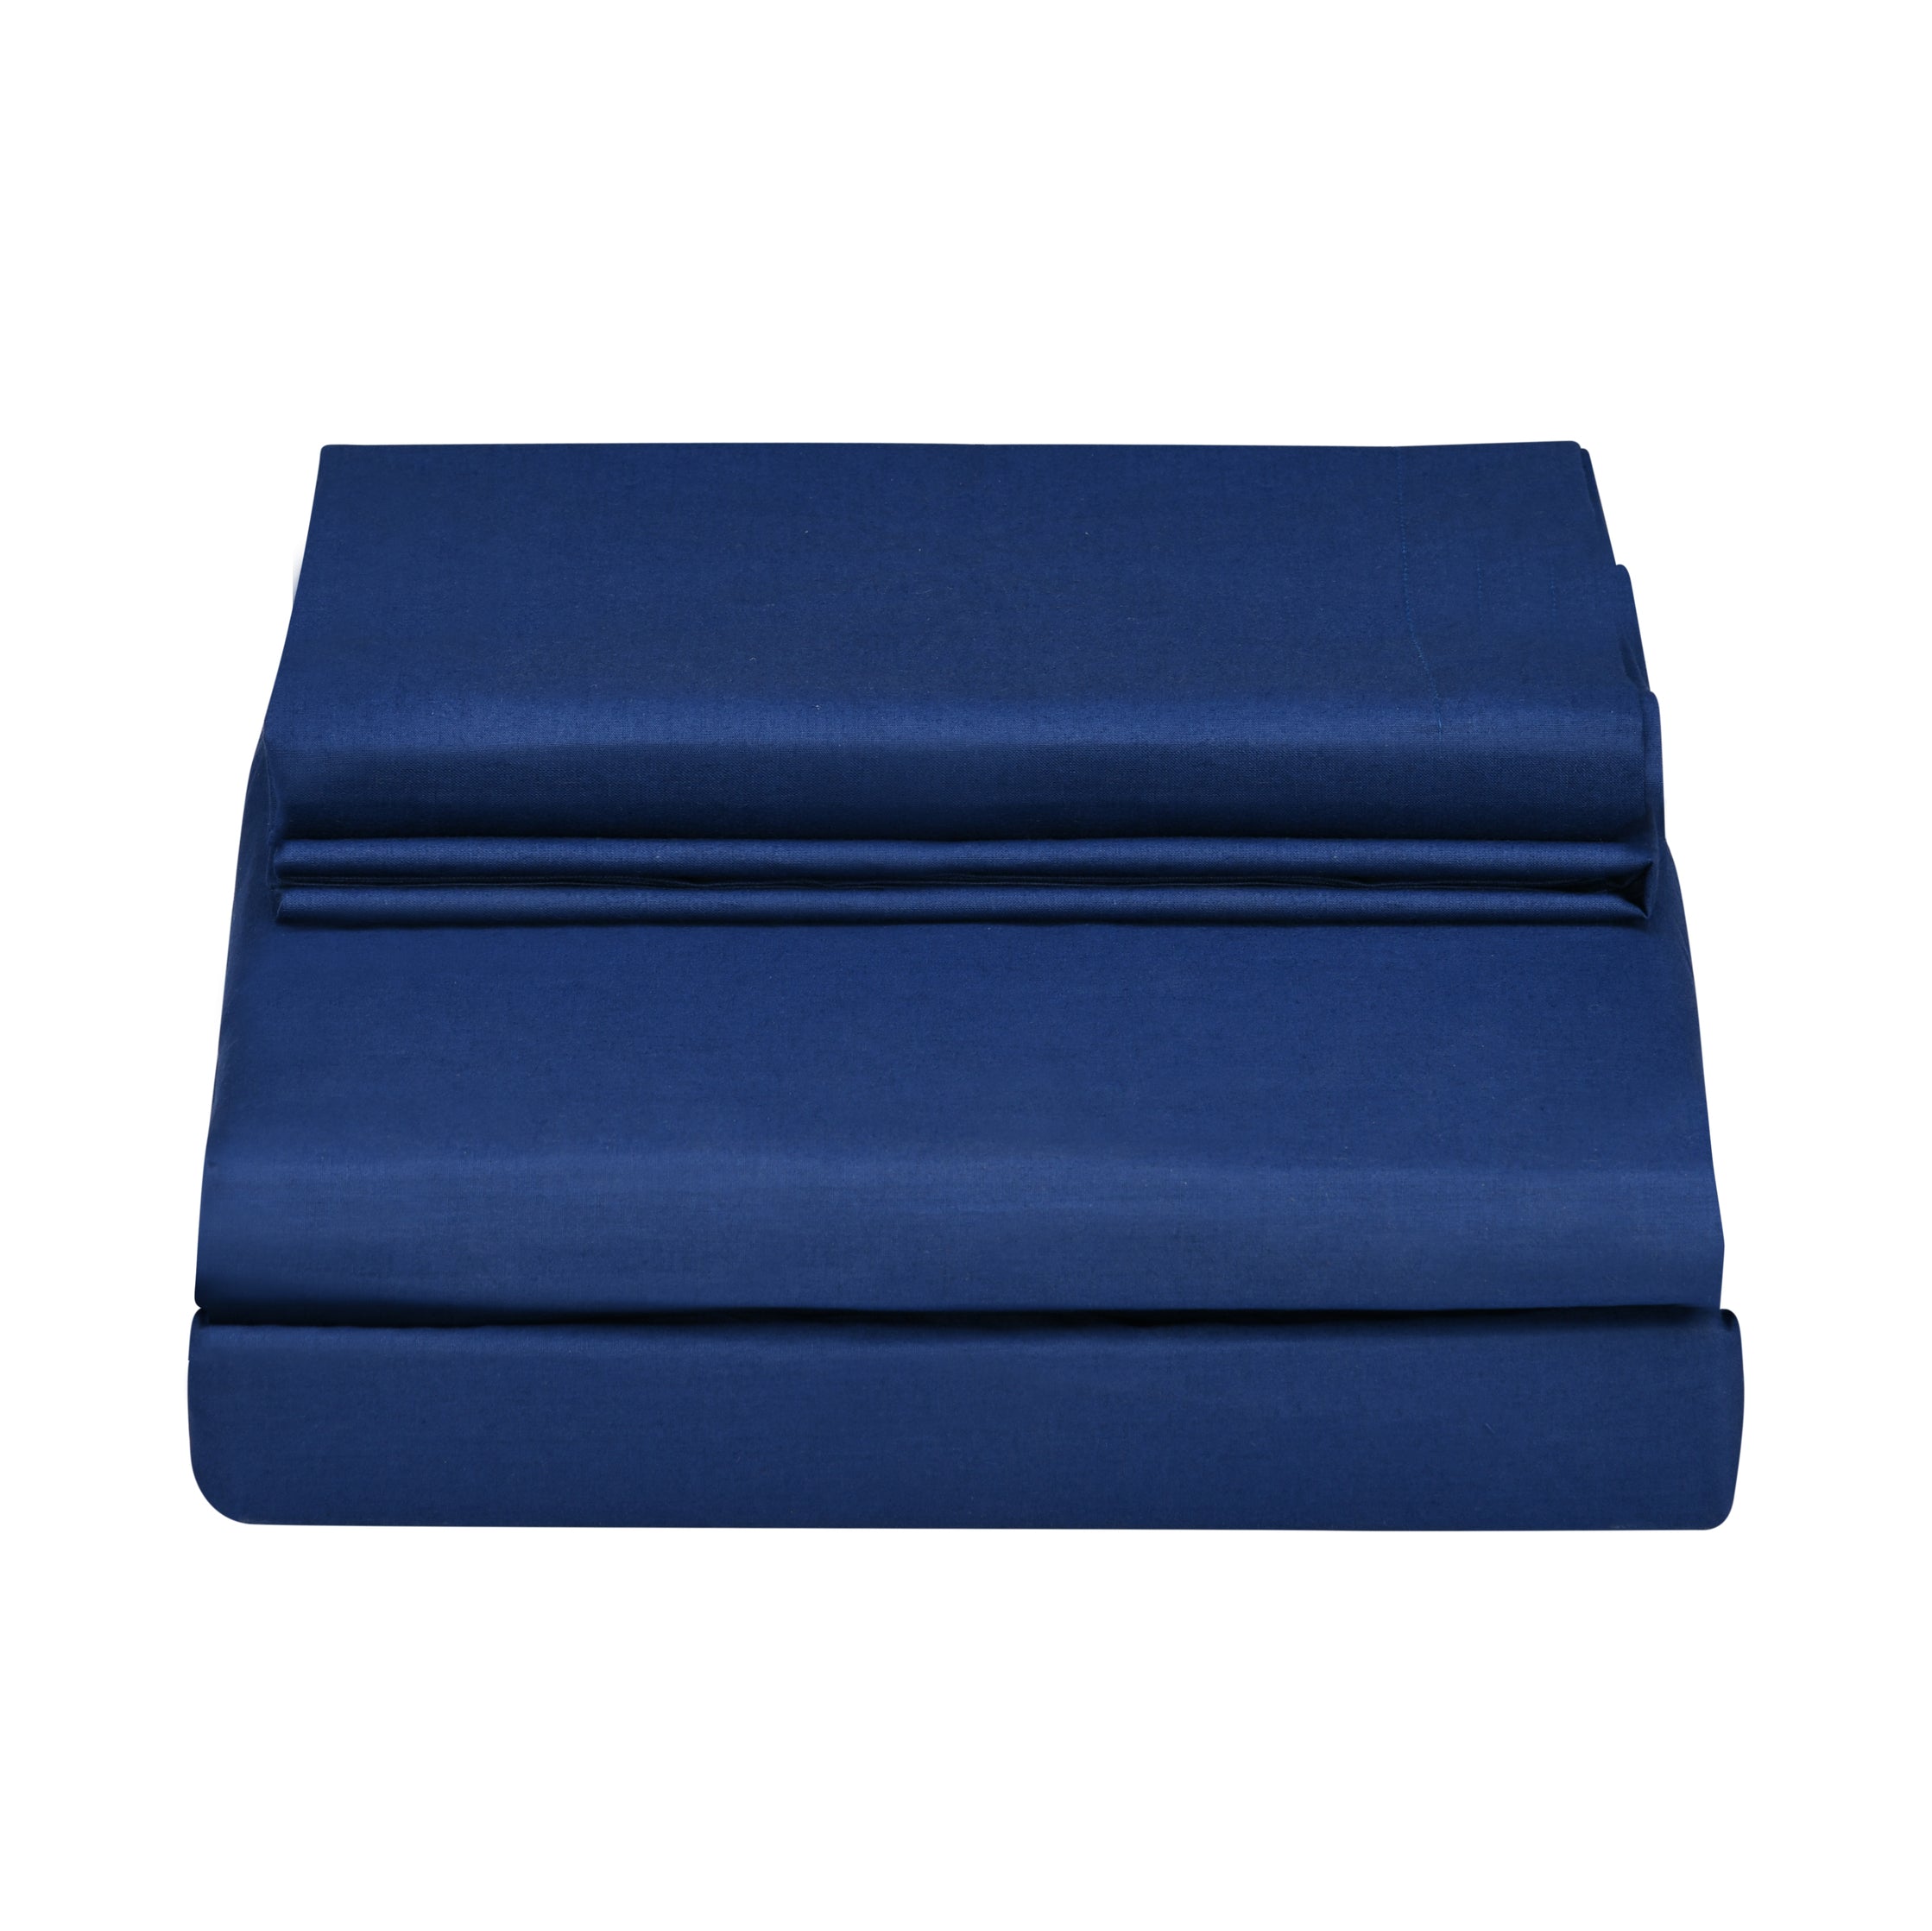 Premium Pure Cotton Fitted Bedsheet Navy Blue folded view